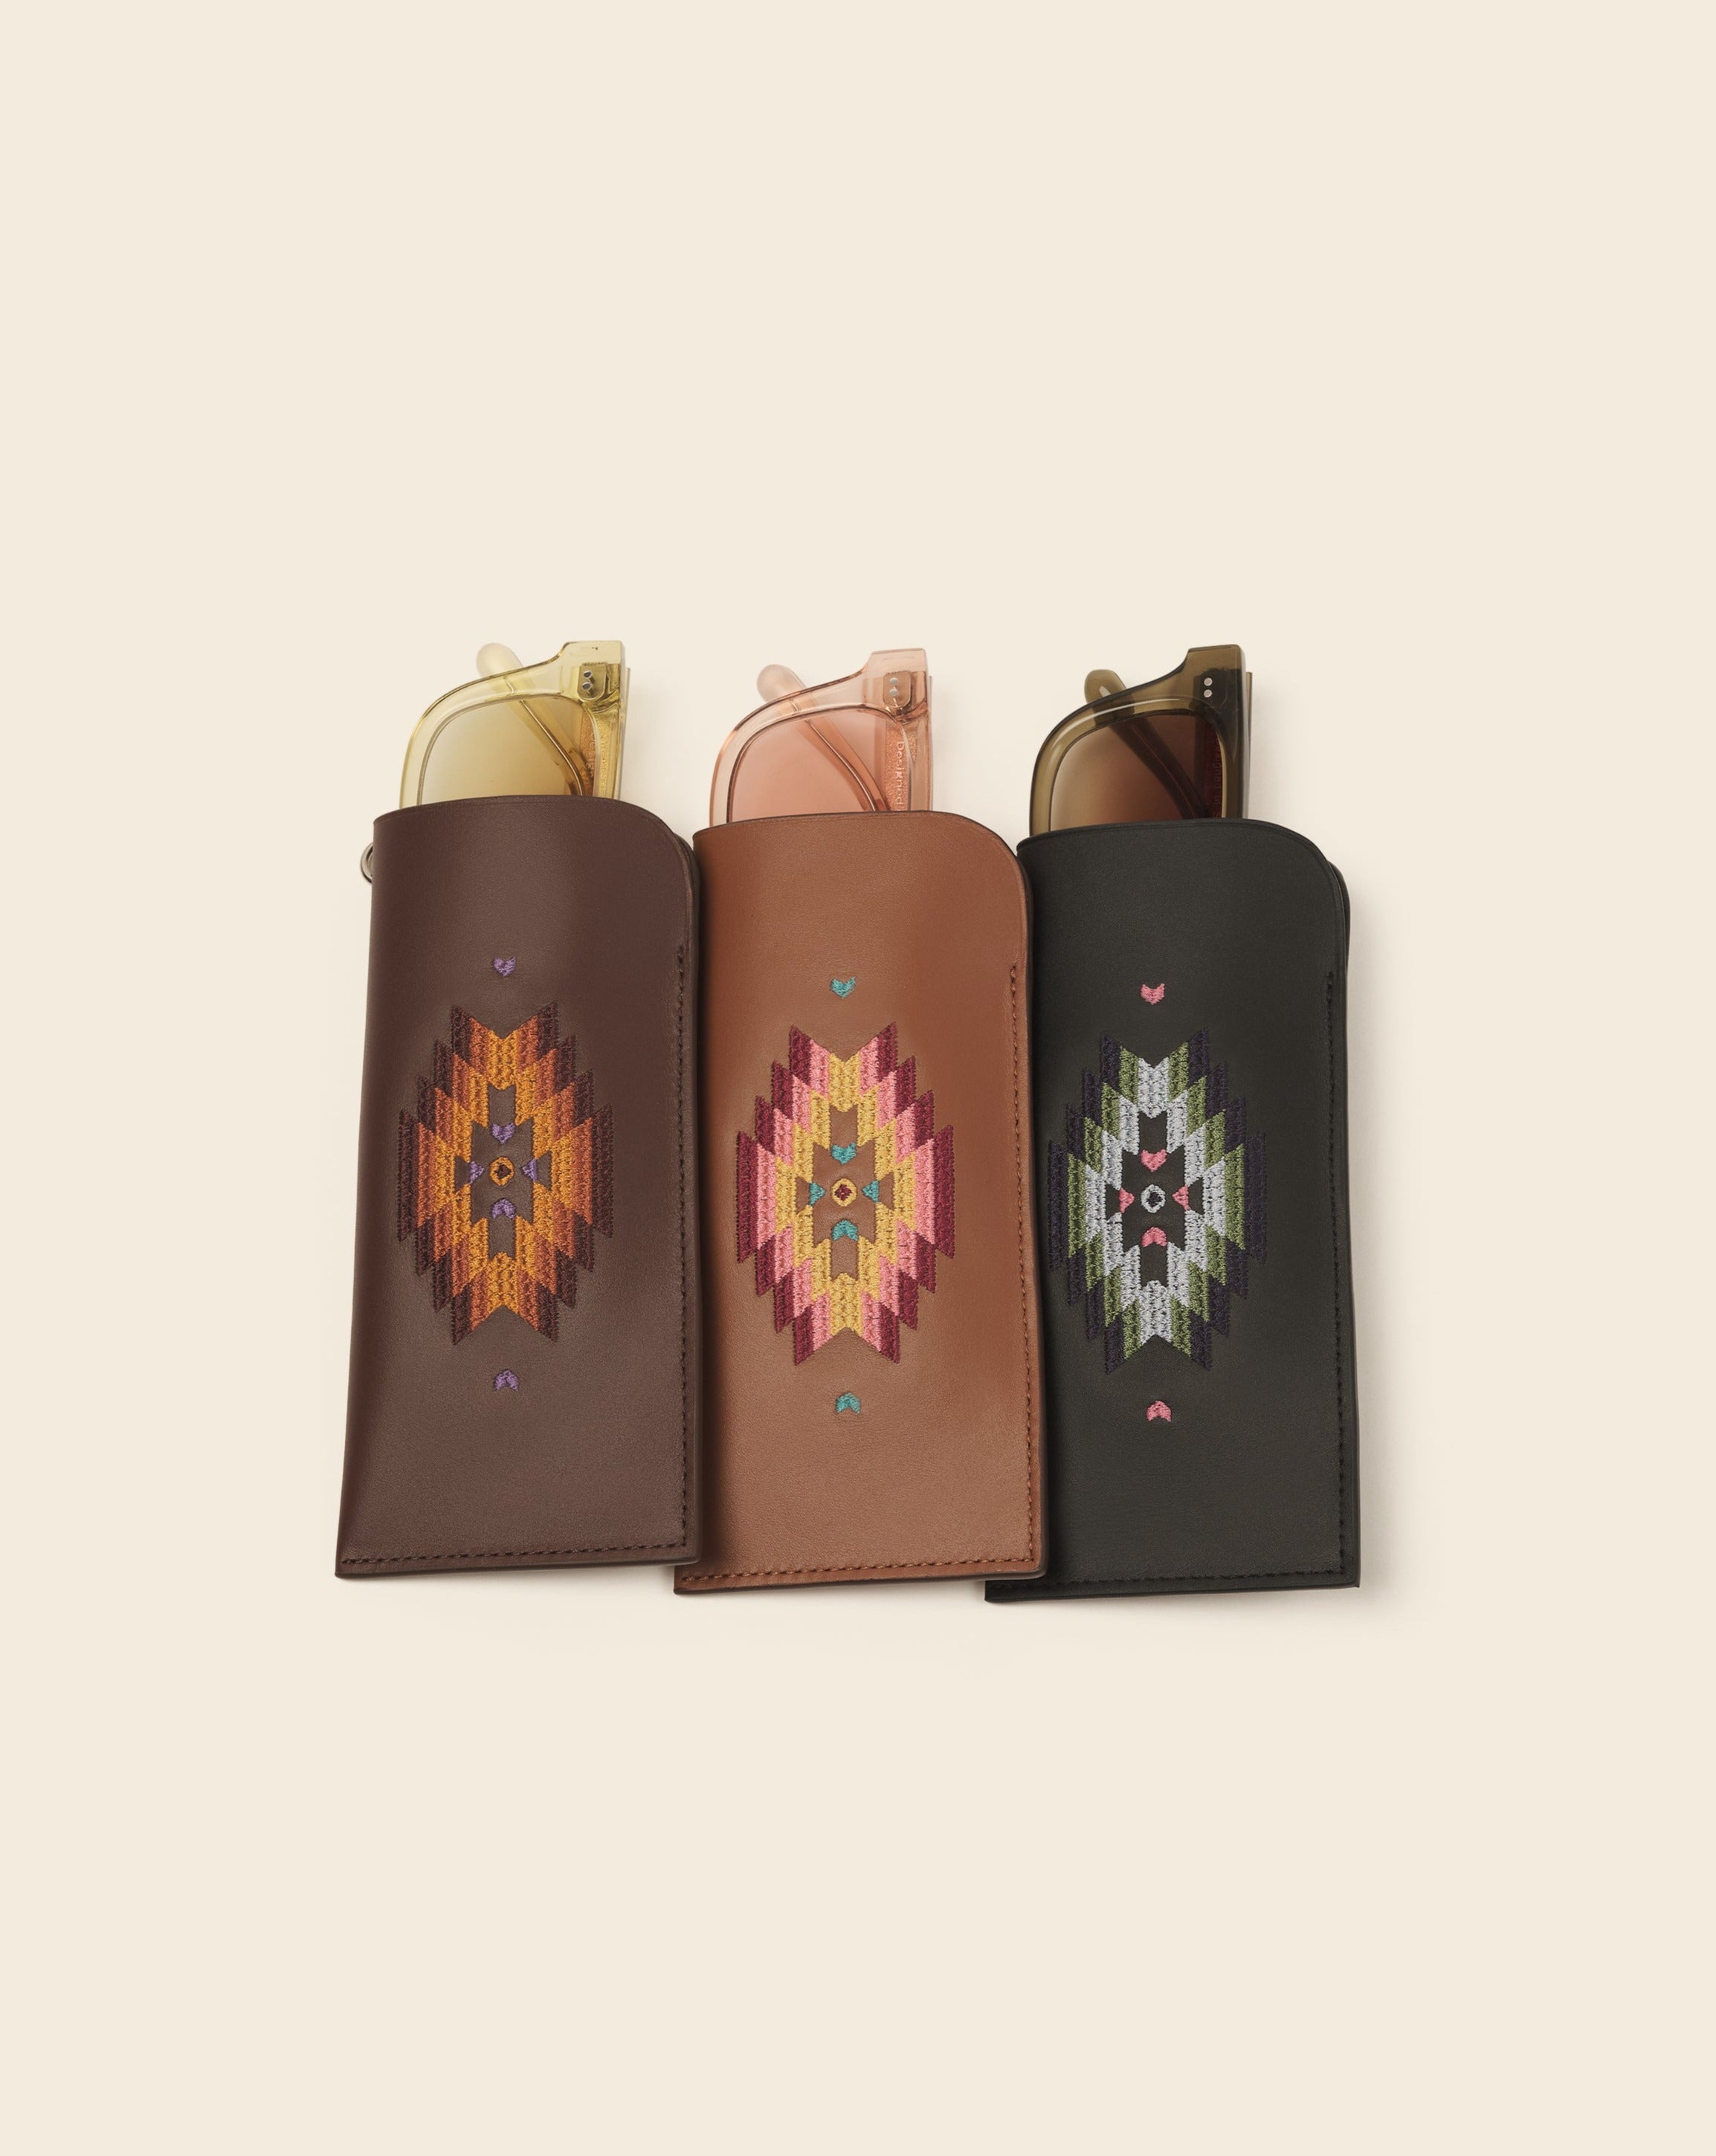 MAKALU - Glasses sleeve - Brown leather & multicolored embroidery